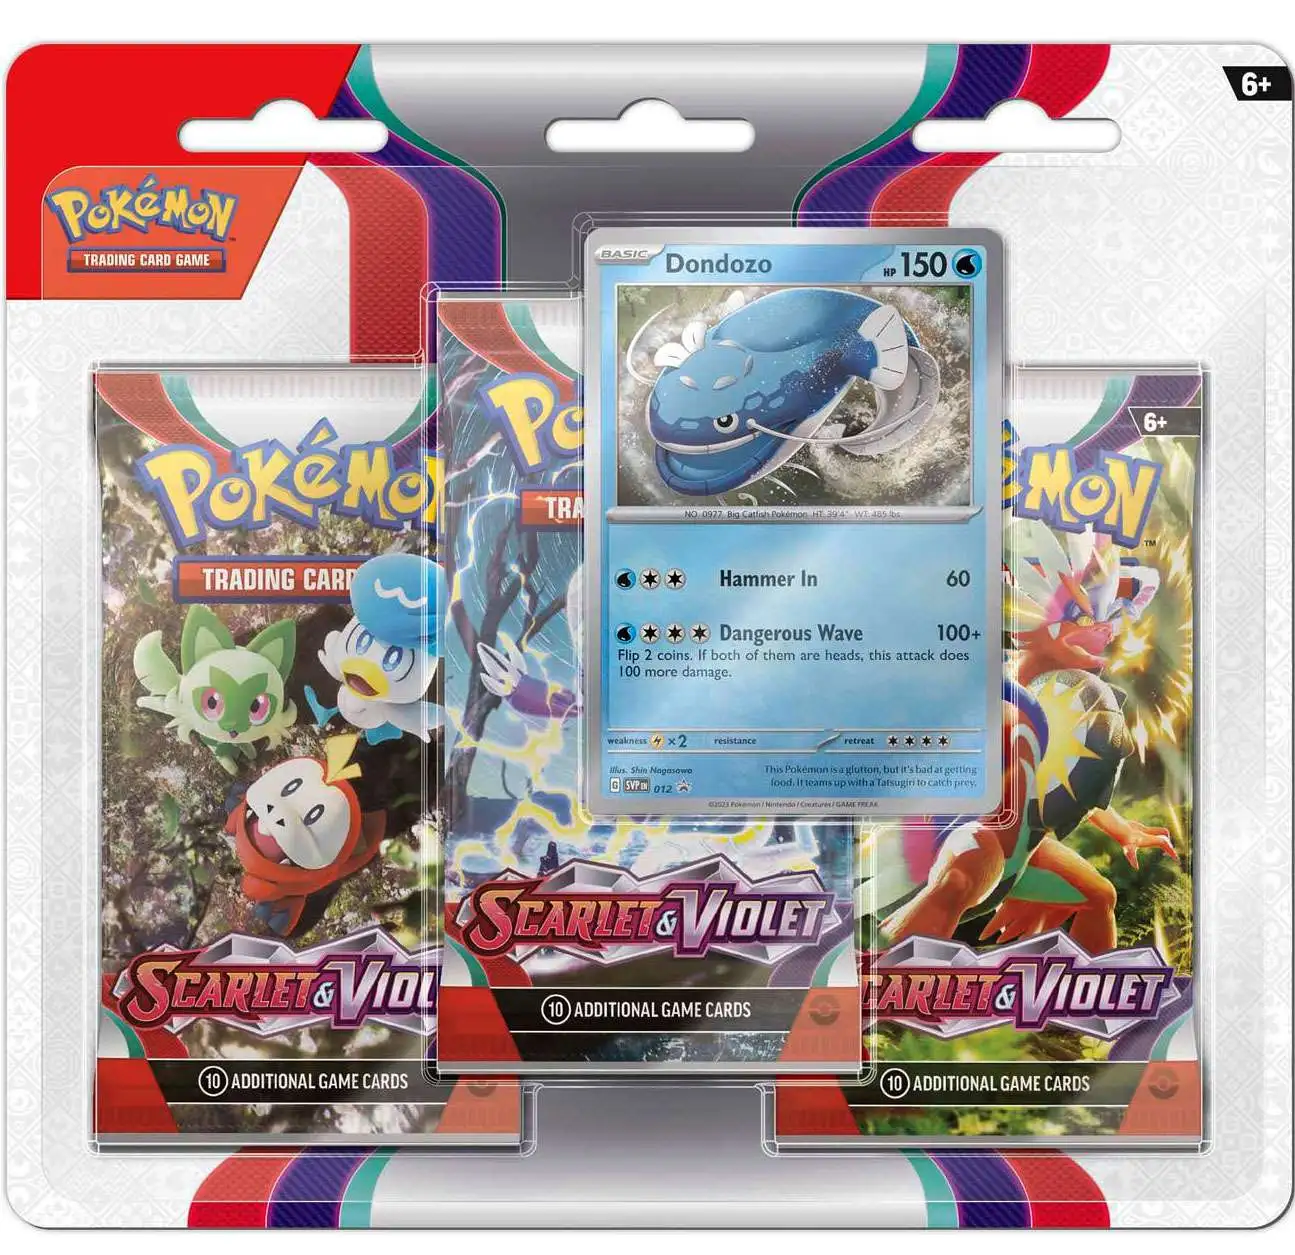 Three More Cards From Pokemon TCG 'Unbroken Bonds' Expansion